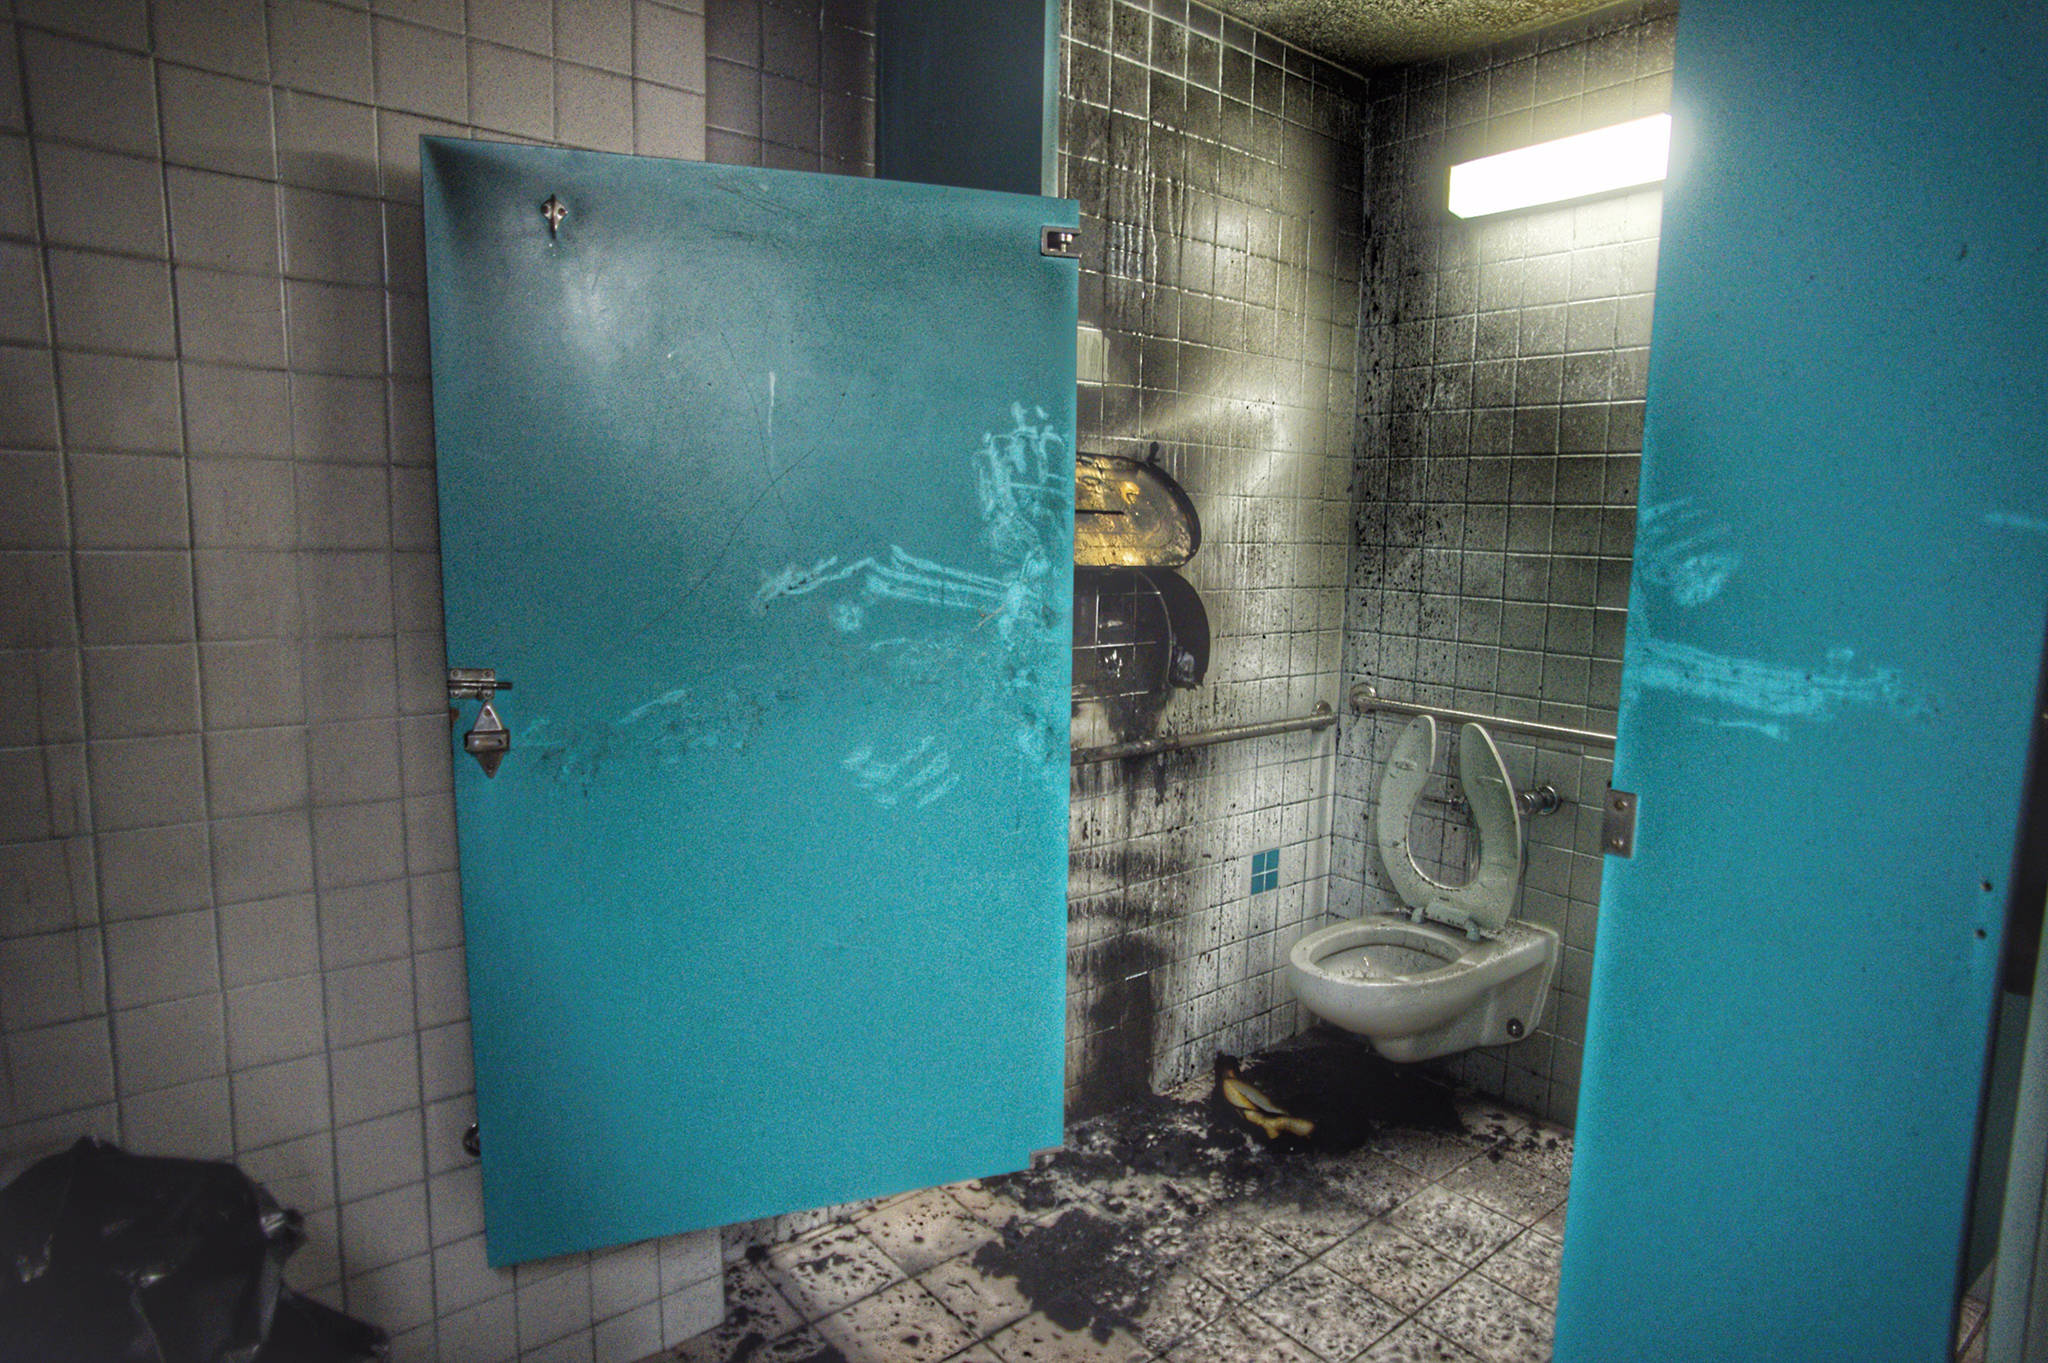 Smoke and fire damage in the men’s bathroom at the Mendenhall Mall on Wednesday, Dec. 5, 2018. (Michael Penn | Juneau Empire)